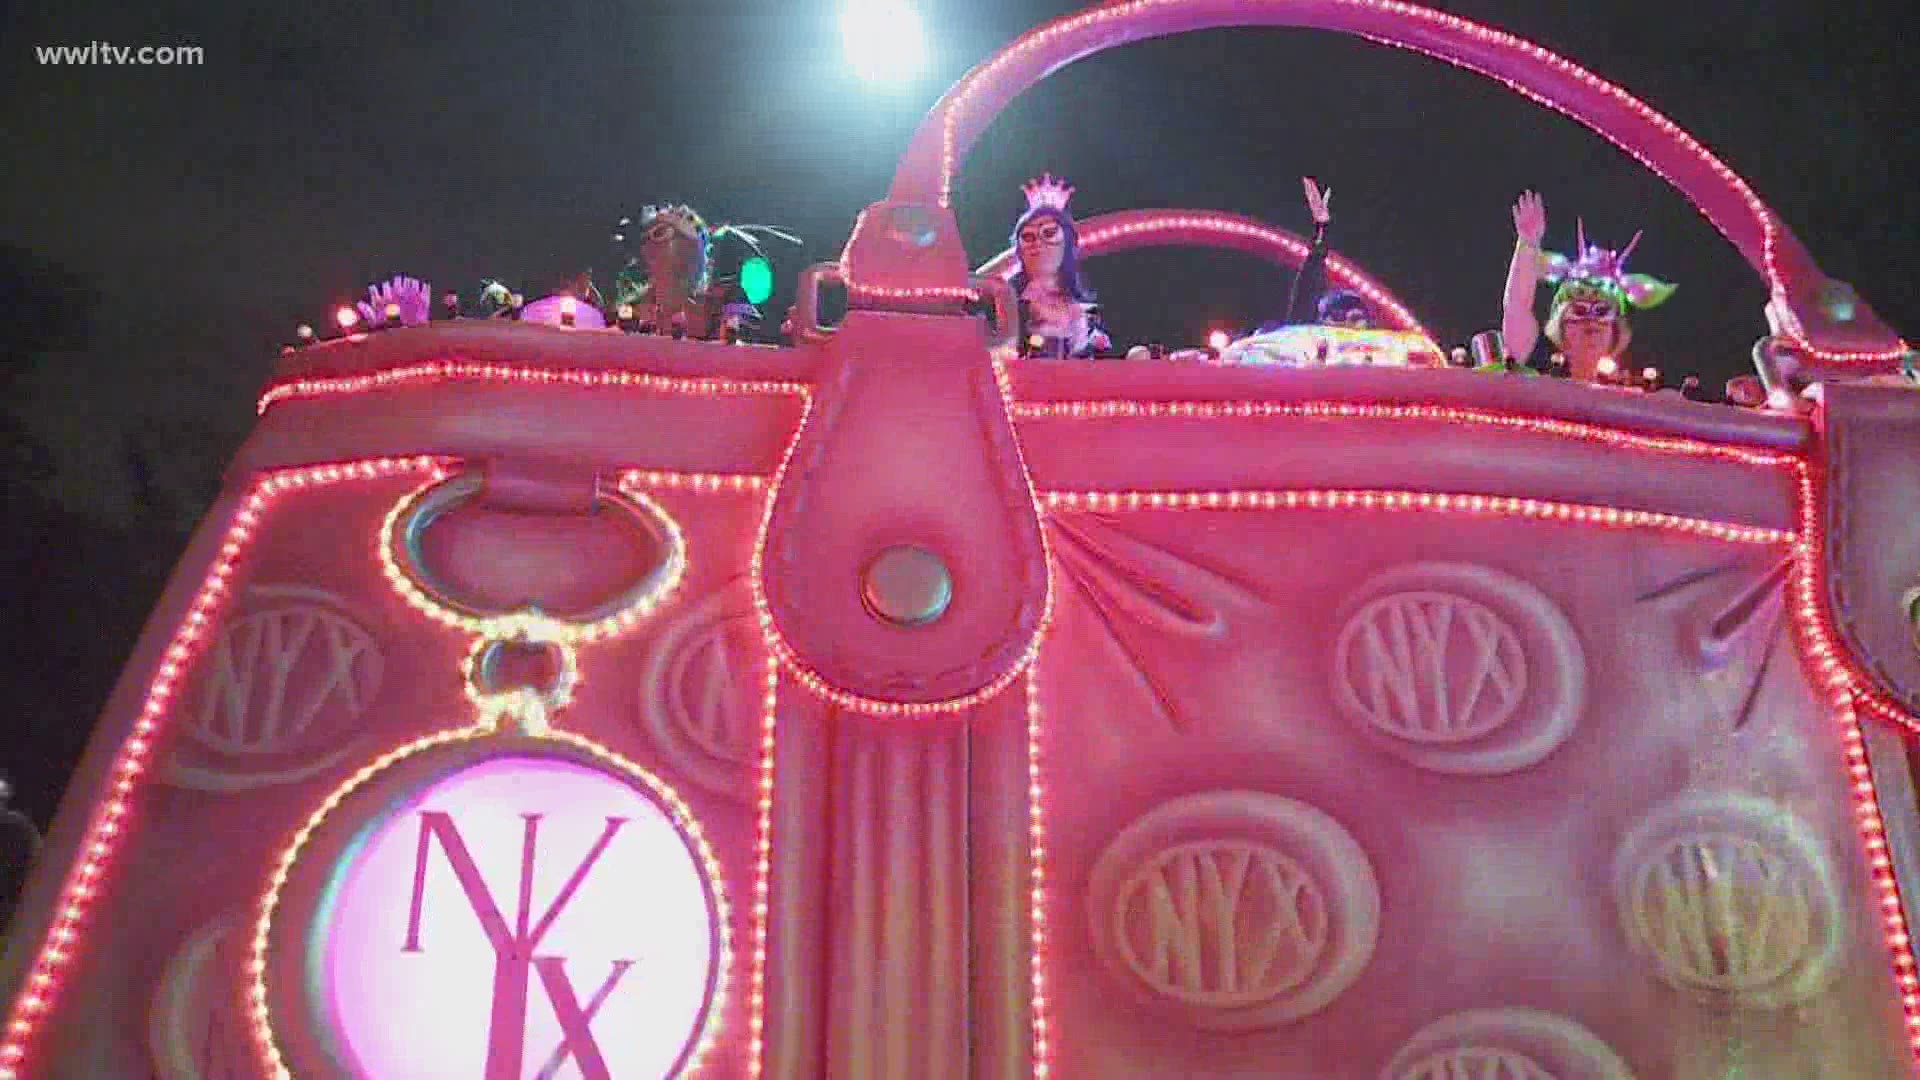 A bylaw that a Krewe of Nyx attorney says was a misunderstanding is now at the center of controversy.